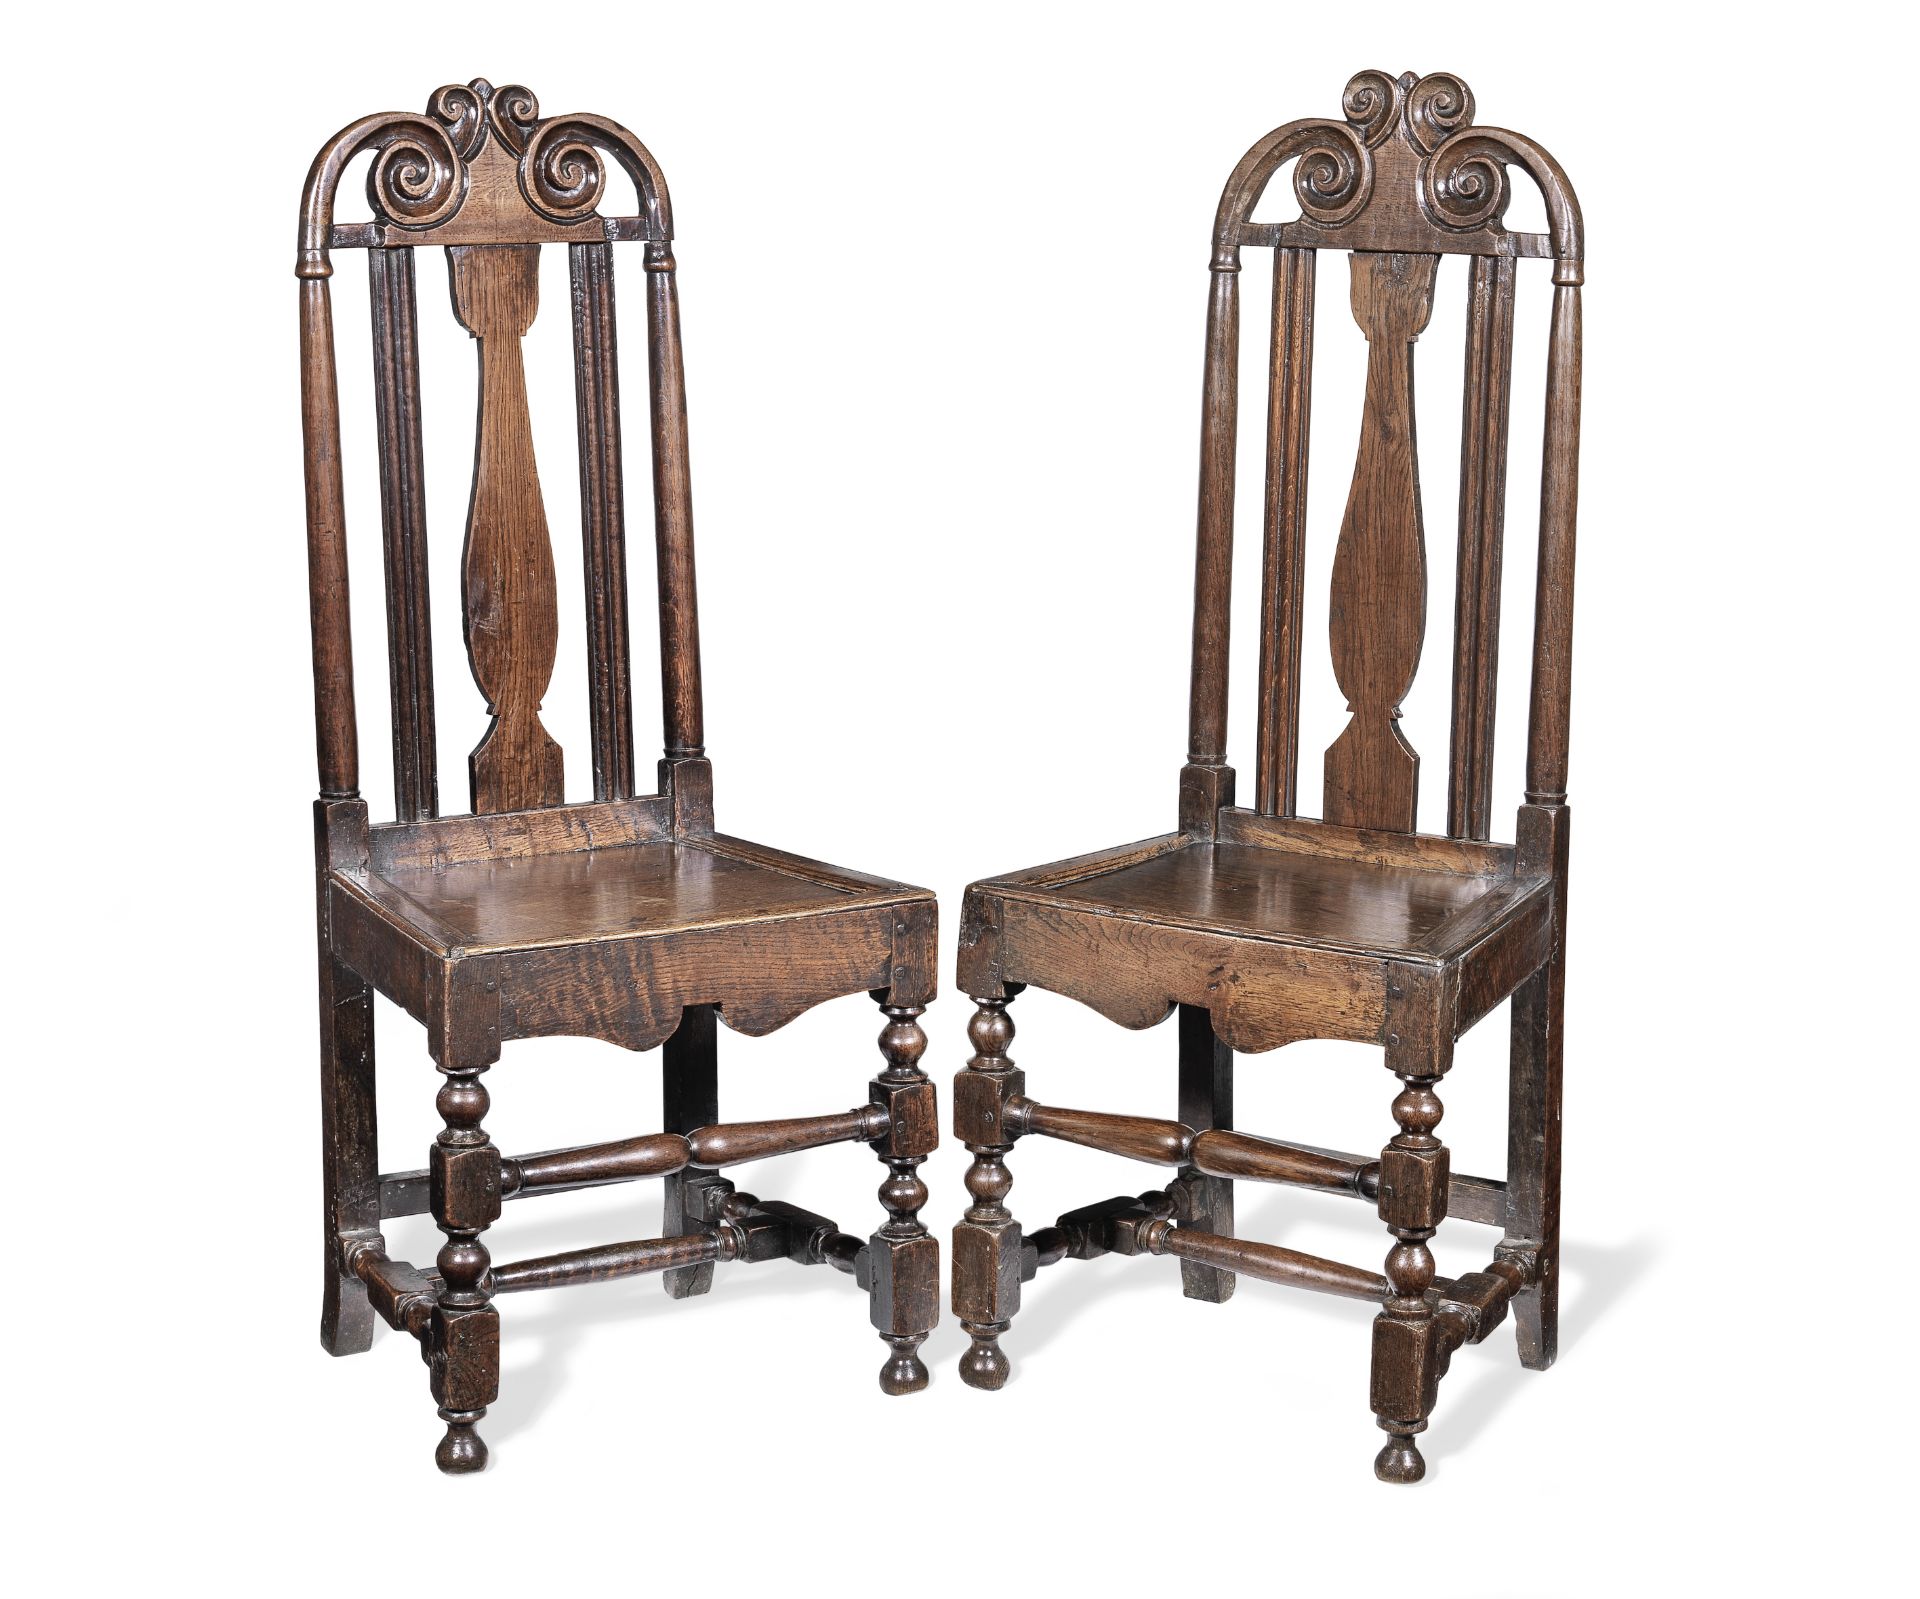 A pair of late 17th century oak chairs (2)